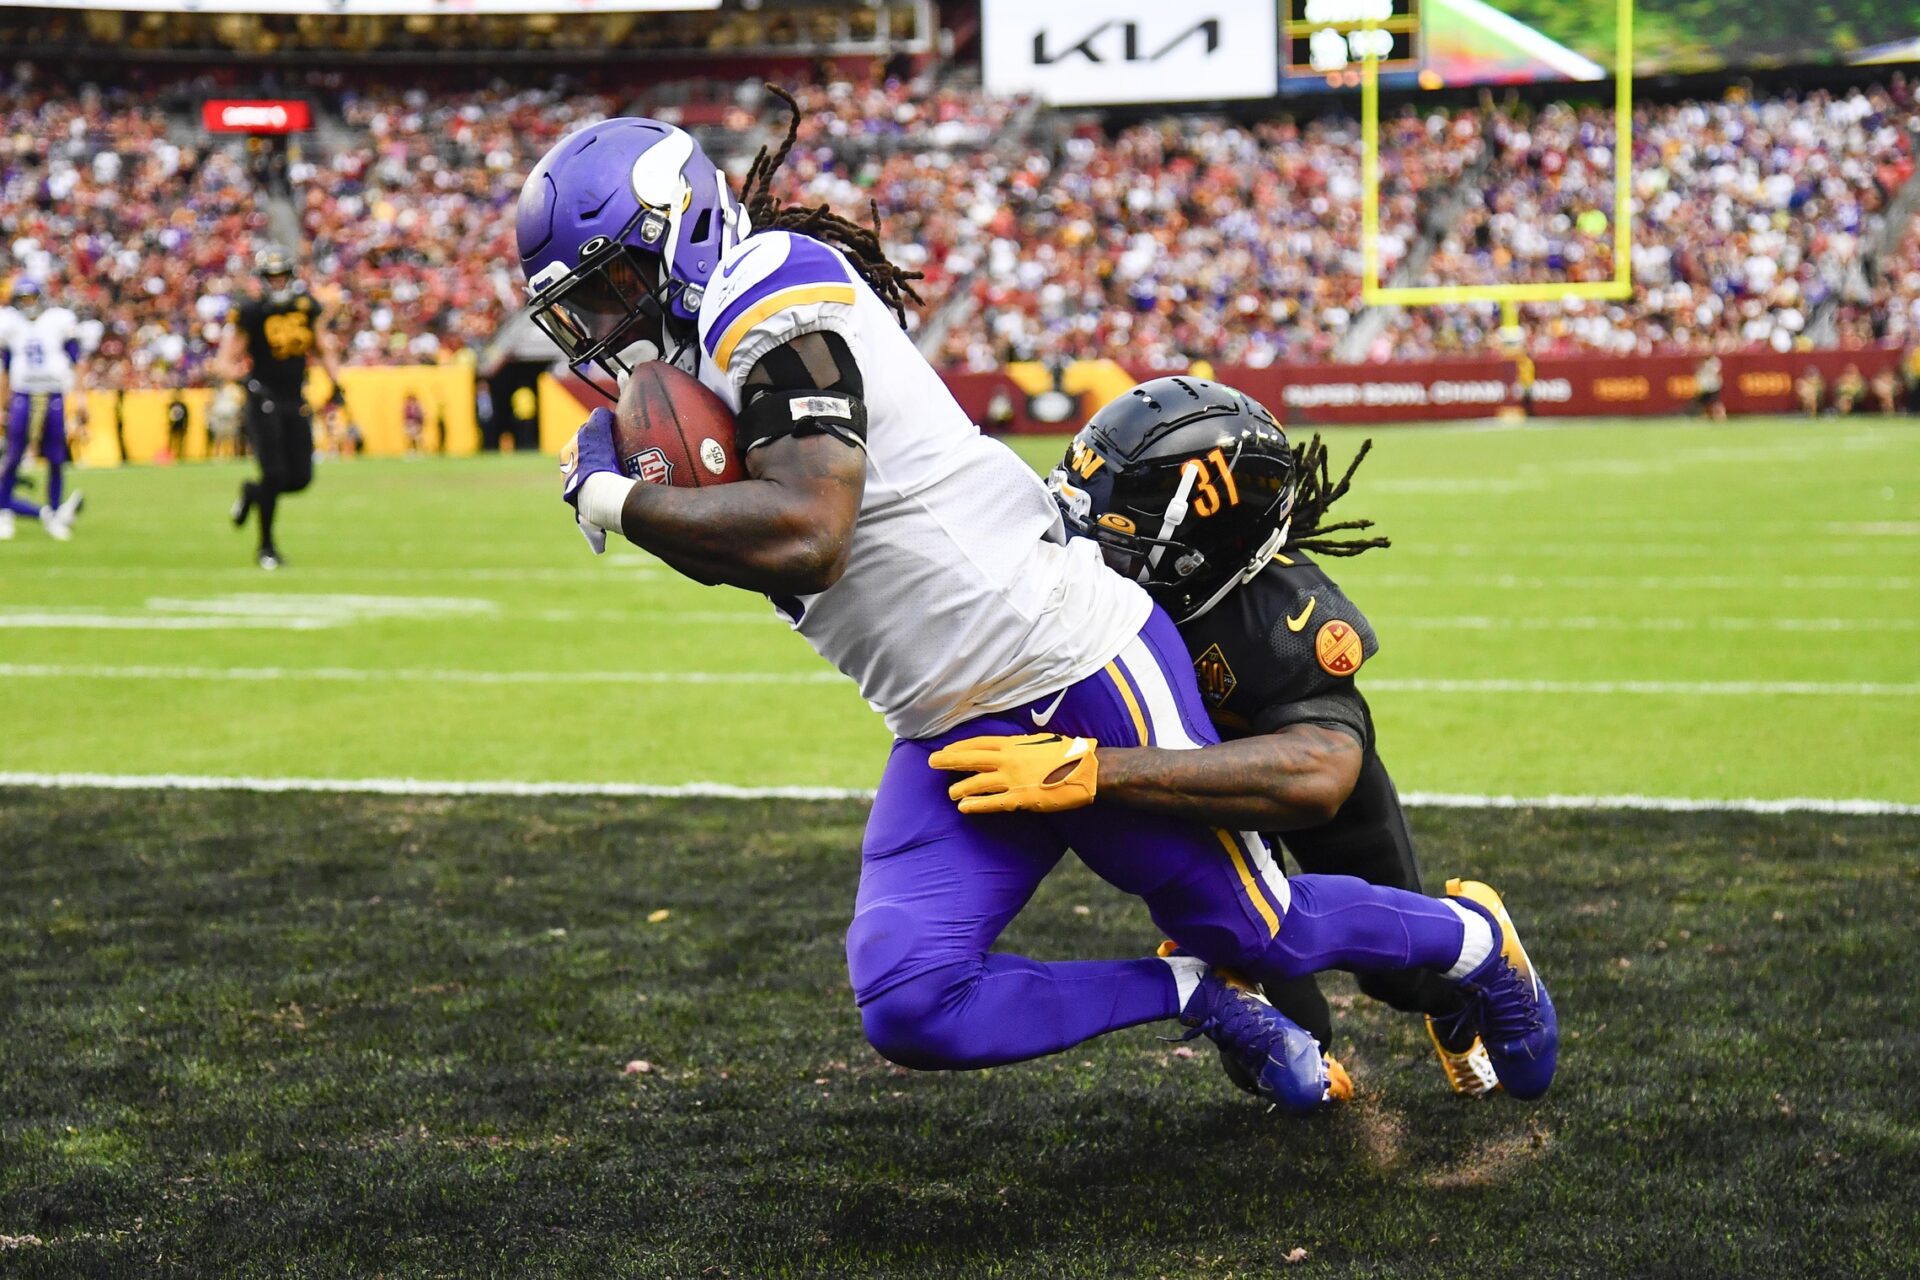 Minnesota Vikings RB Dalvin Cook (4) catches a pass for a touchdown against the Commanders.